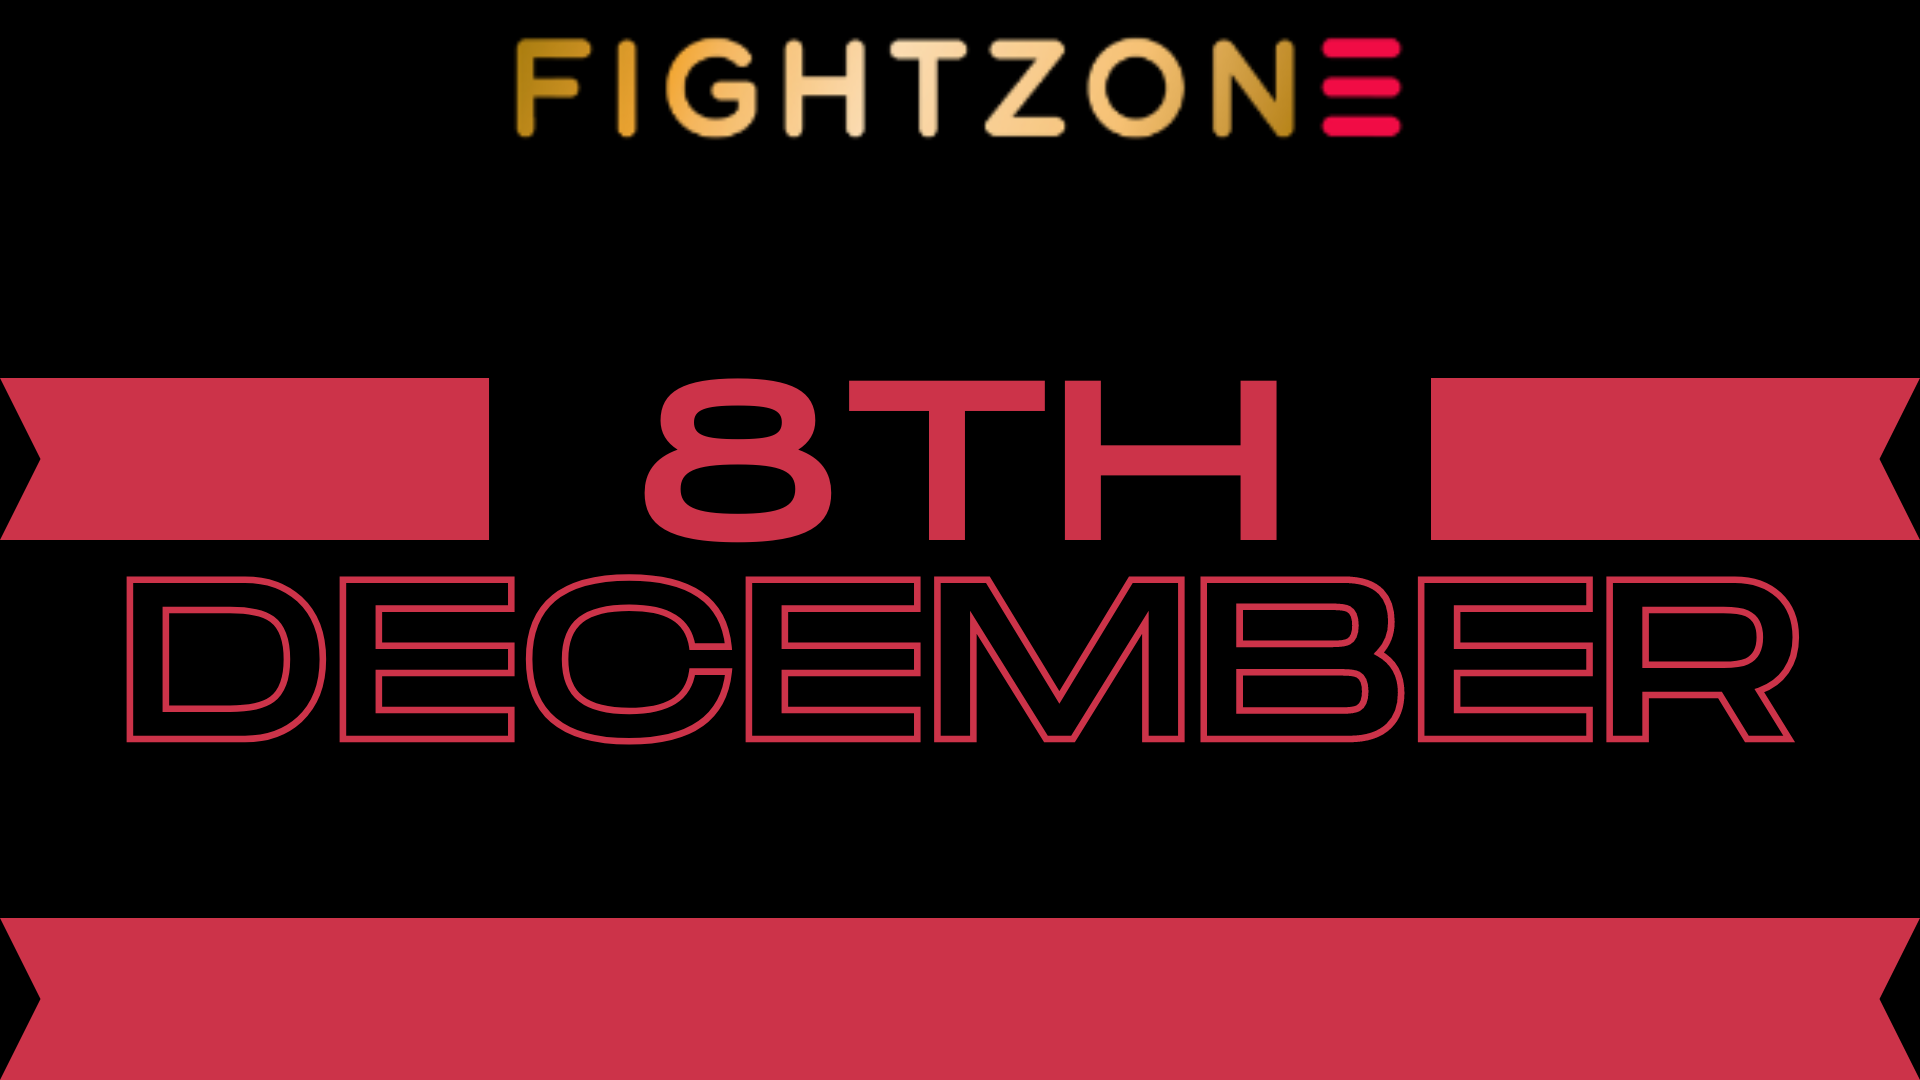 Fightzone promotion event 8th December graphic.